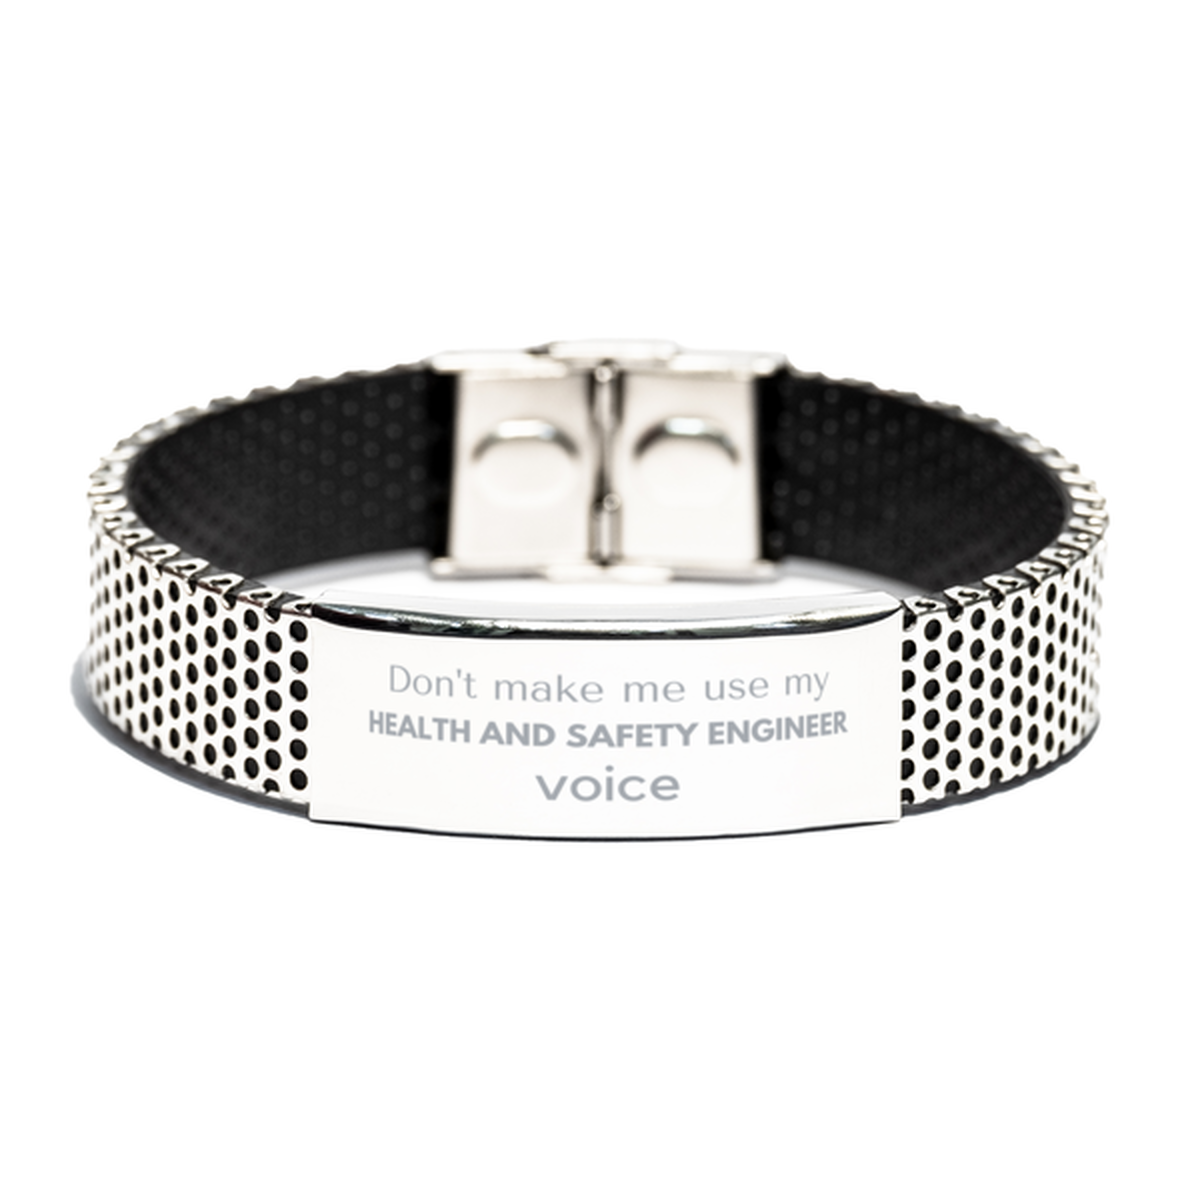 Don't make me use my Health and Safety Engineer voice, Sarcasm Health and Safety Engineer Gifts, Christmas Health and Safety Engineer Stainless Steel Bracelet Birthday Unique Gifts For Health and Safety Engineer Coworkers, Men, Women, Colleague, Friends